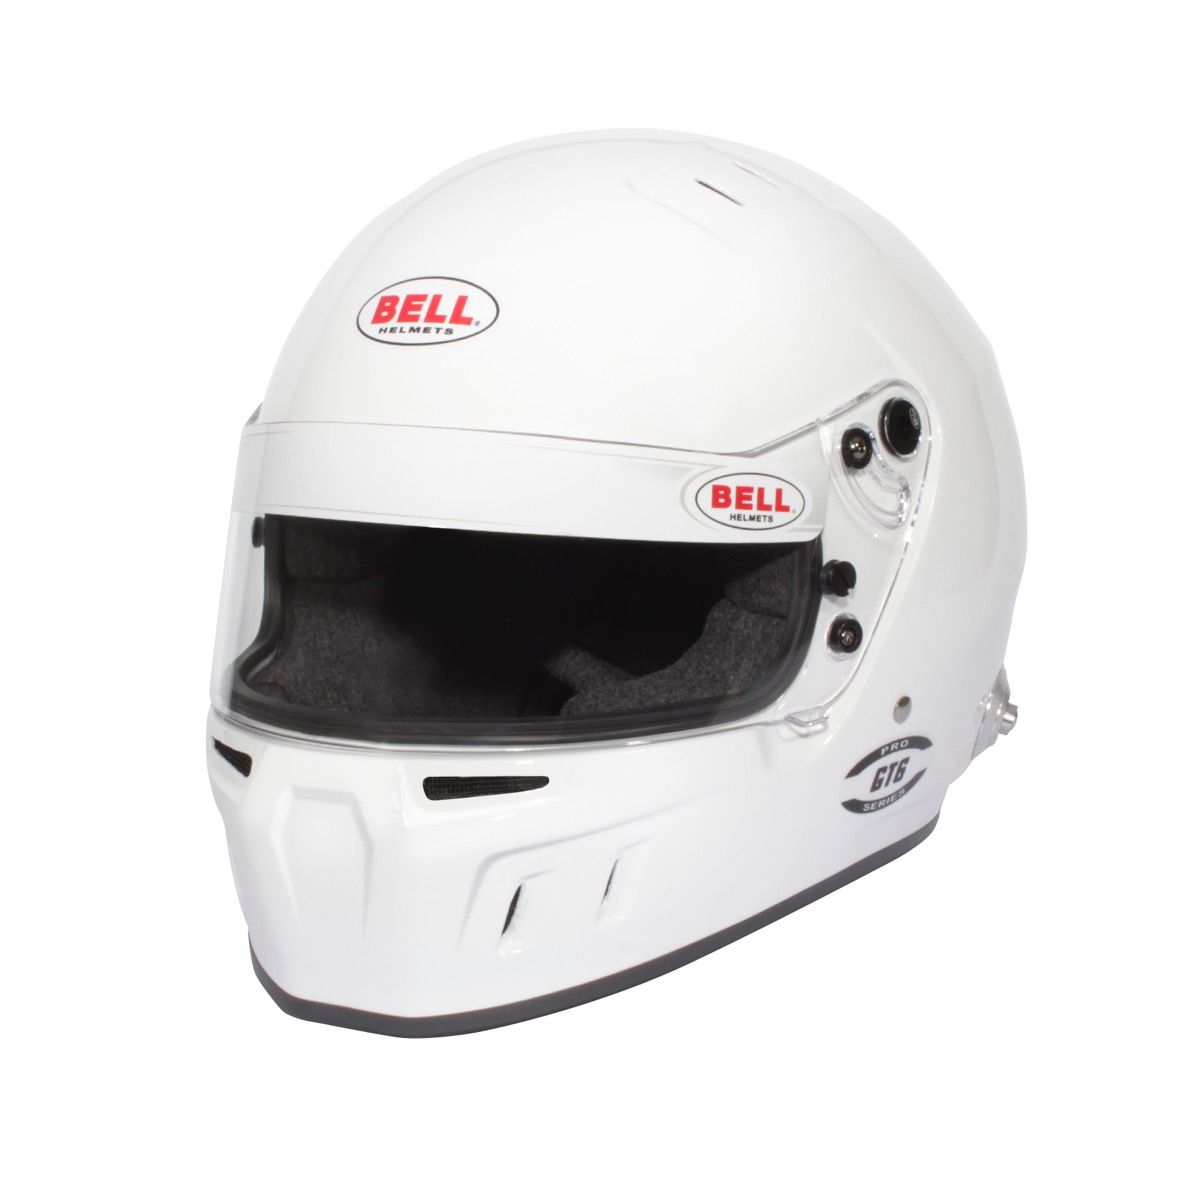 Bell GT6 Gloss white Helmet SA2020 Front View Image